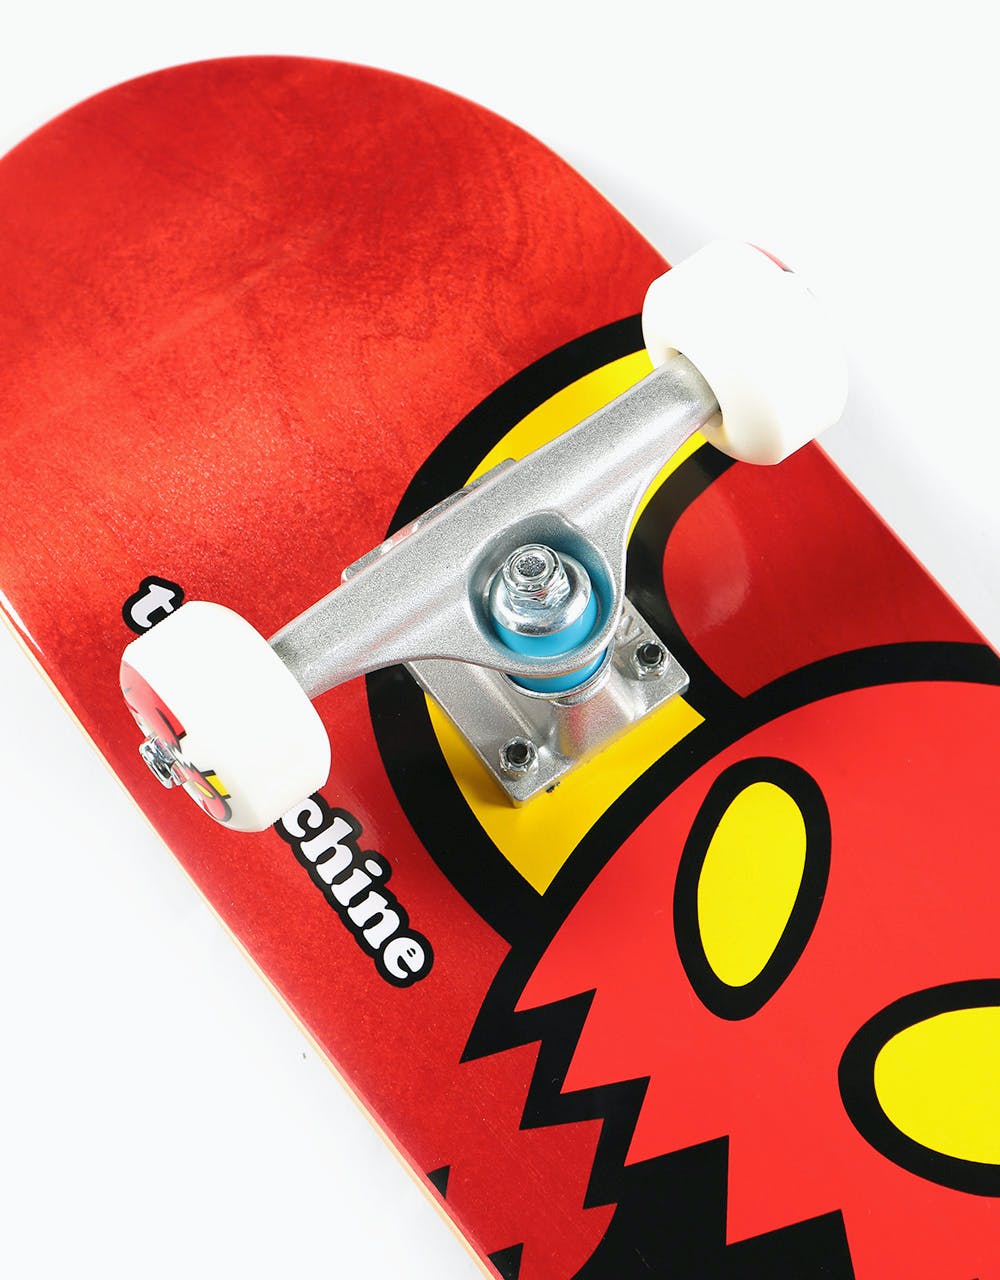 Toy Machine Vice Monster Complete Skateboard - 7.75"